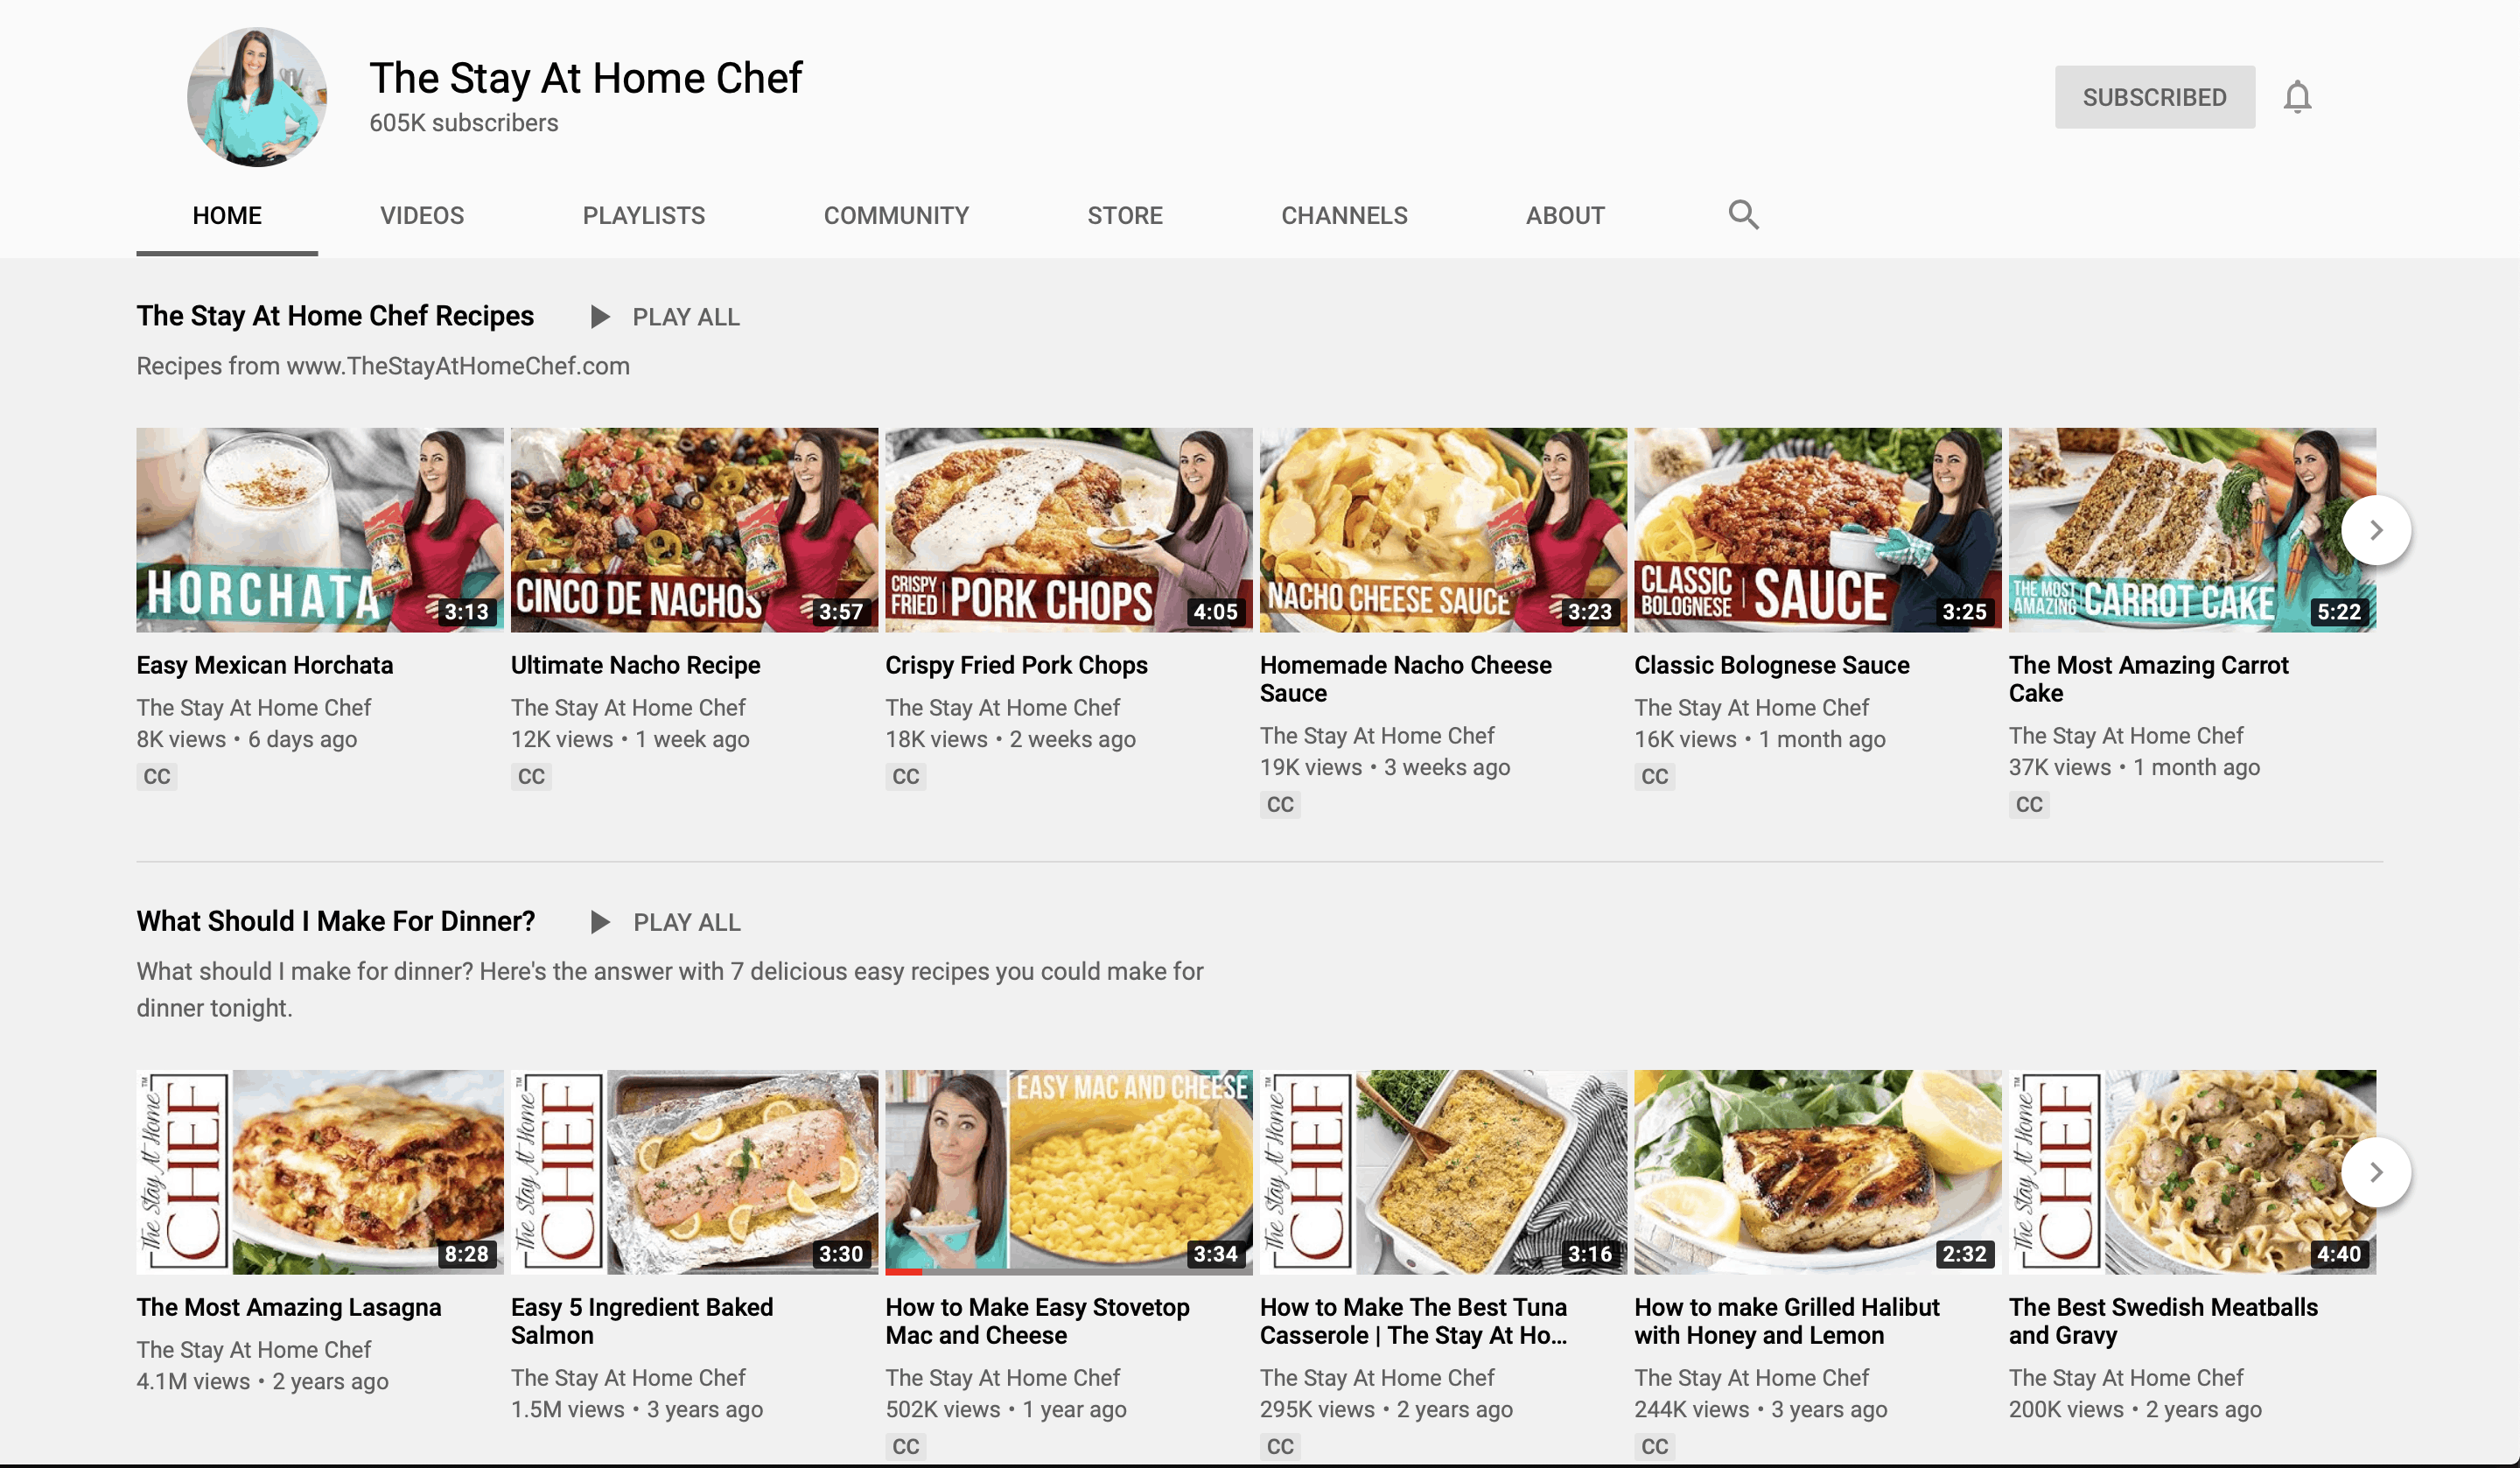 Section of YouTube channel for The Stay At Home Chef.